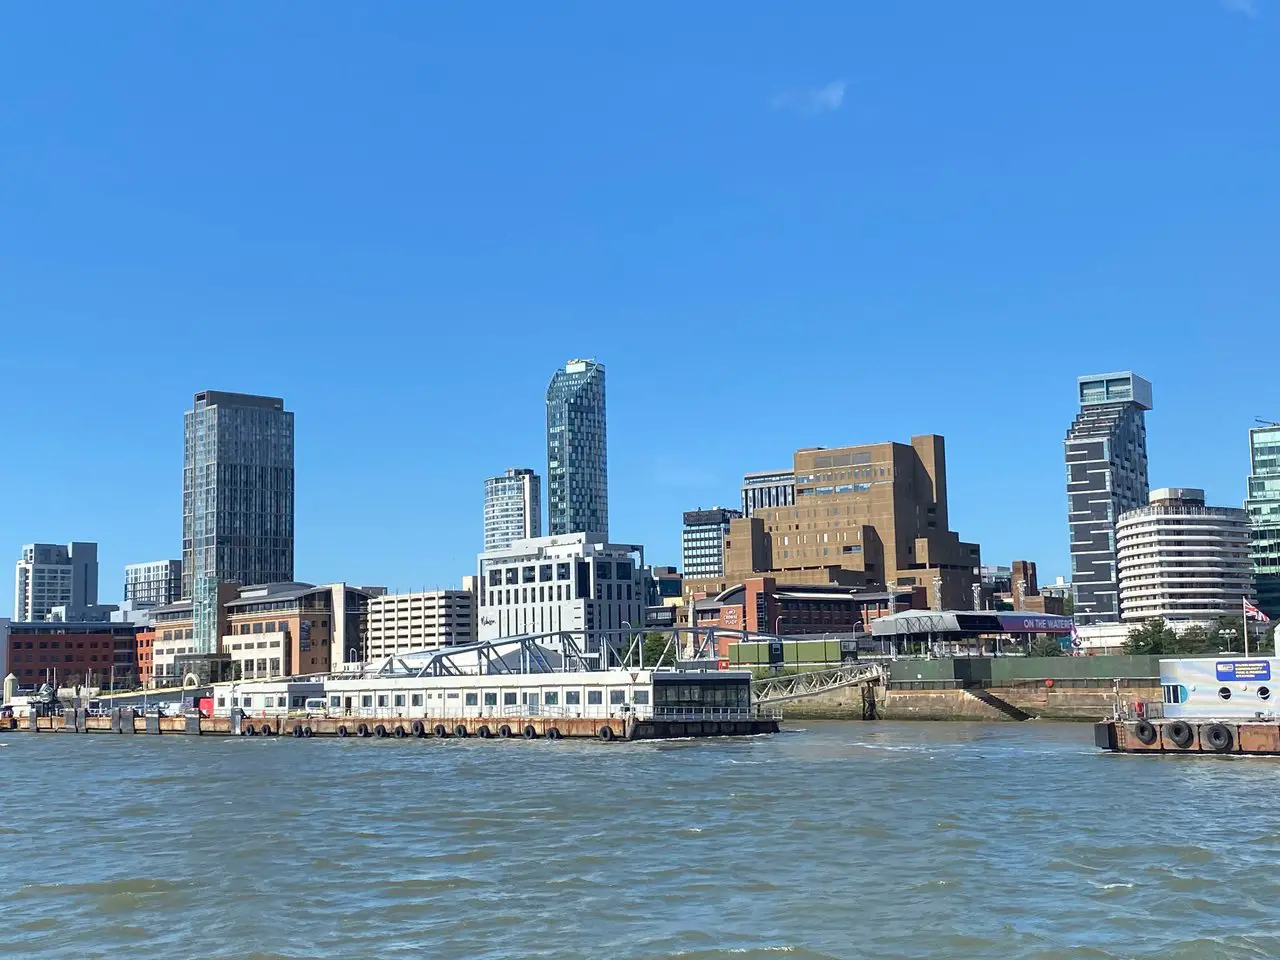 View of Liverpool city skyline from the River Mersey on a sunny day. You'll get great views like this on Liverpool boat trips.